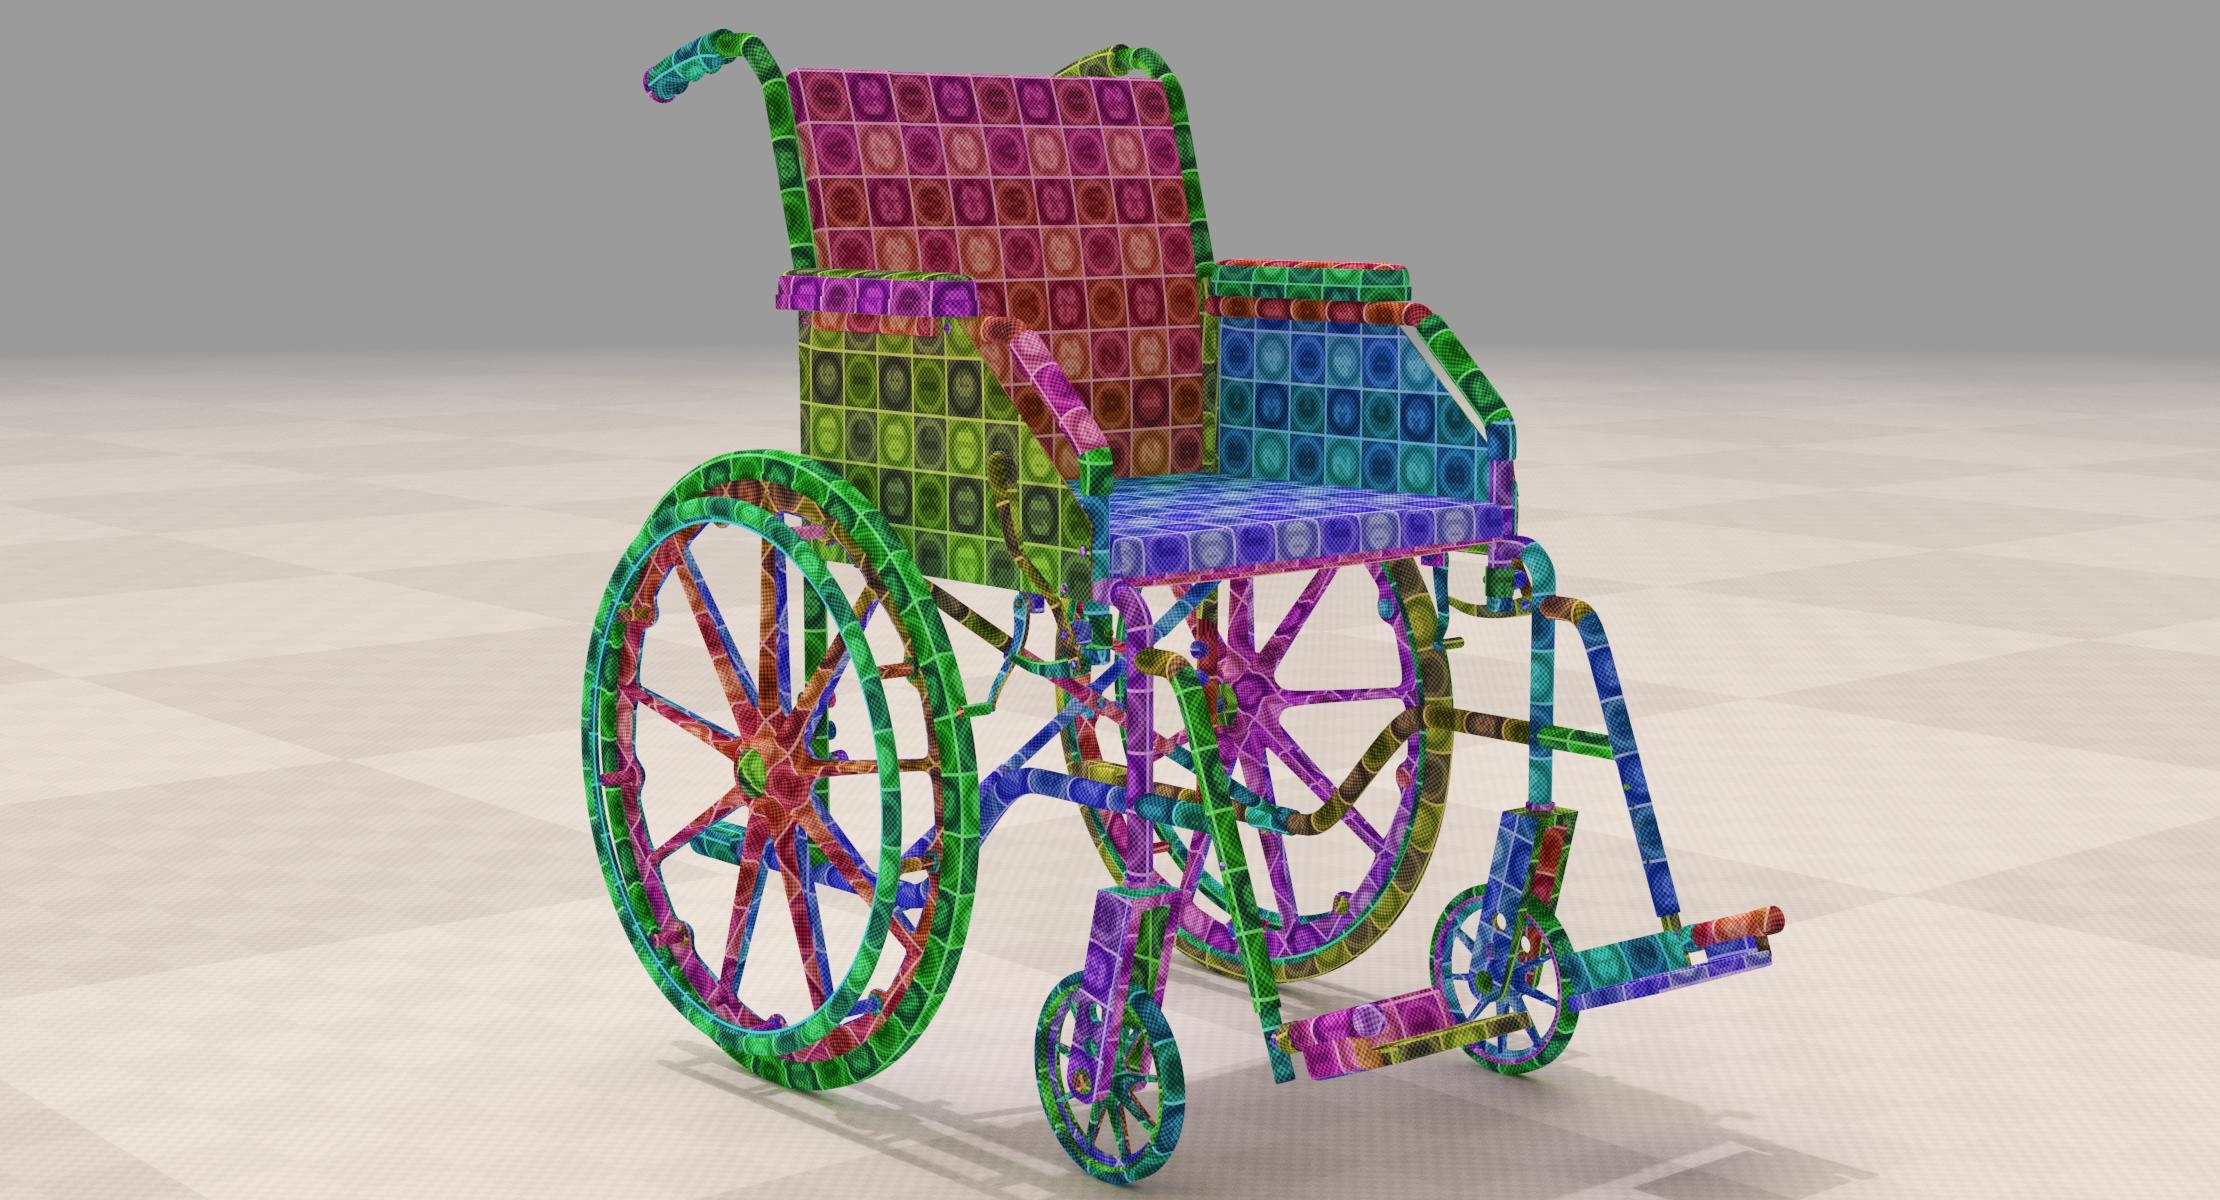 disabled3d(disabled disabled)